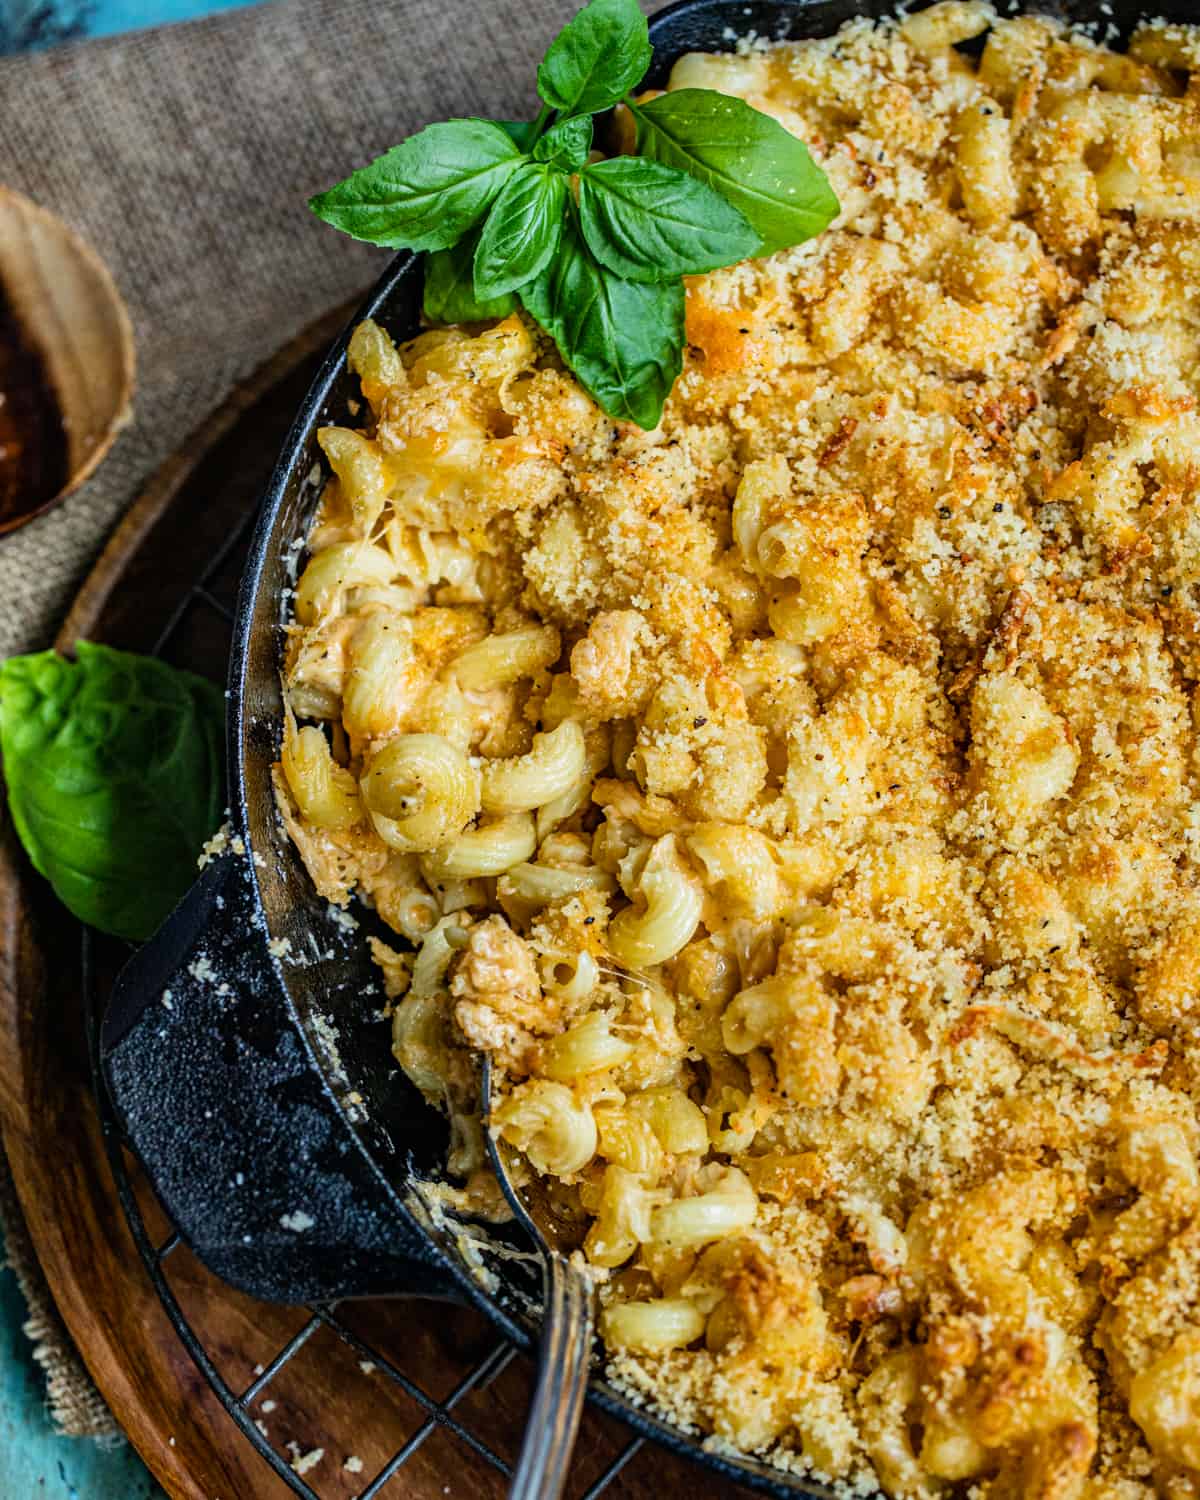 smoked macaroni and cheese in a cast iron skillet garnished with fresh herbs.